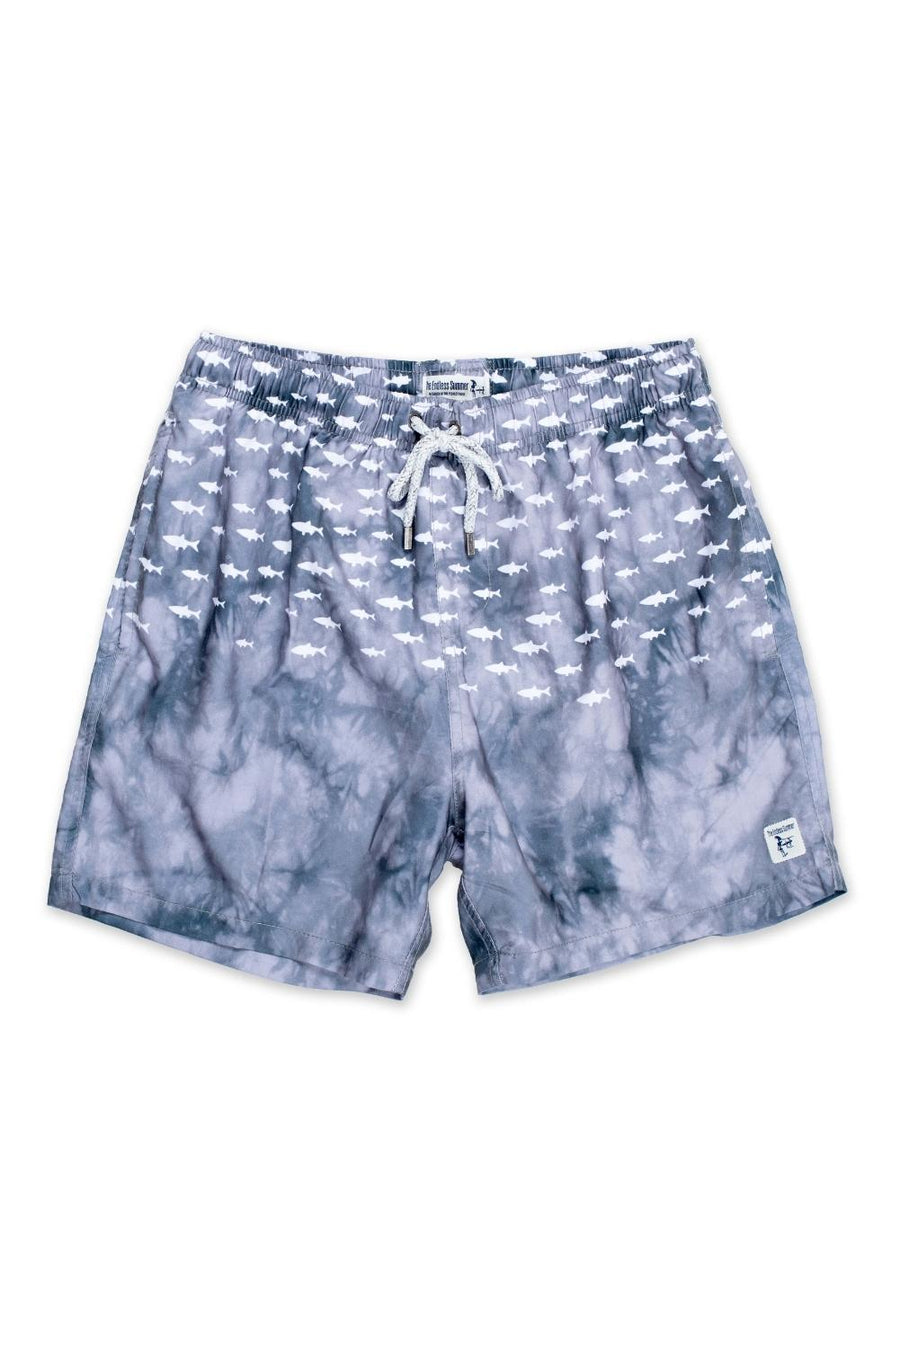 Gray Men's Swimming Trunks Grayscale With Shark - Vacay Land 